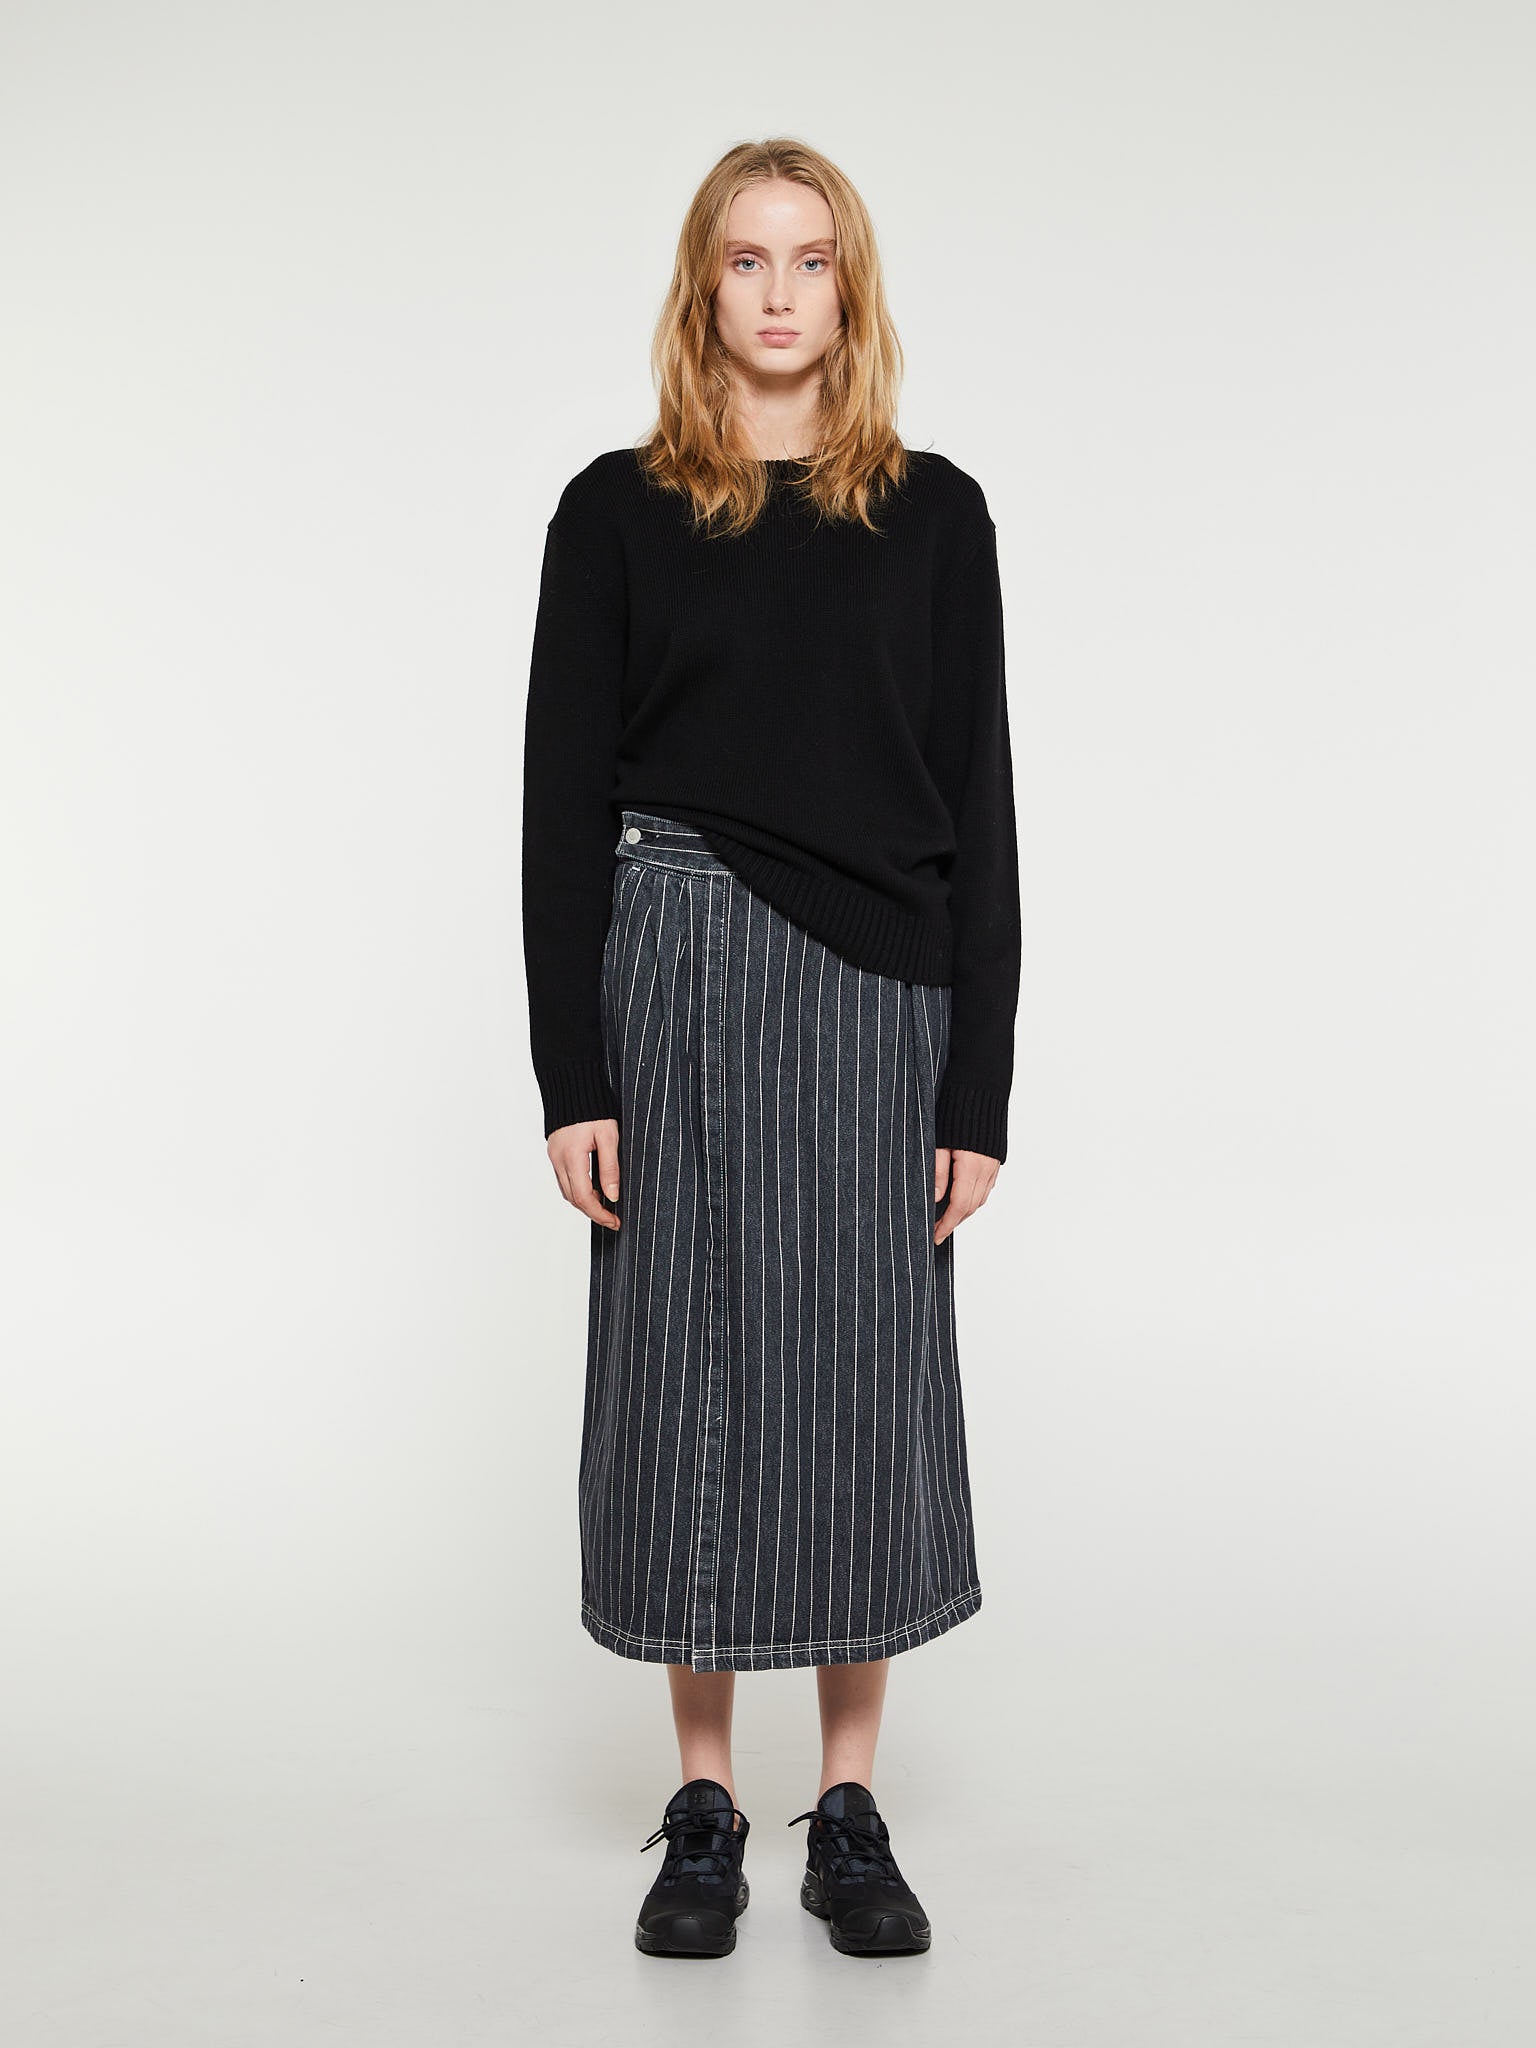 Carhartt - W' Orlean Skirt in Black and White Stone Wash